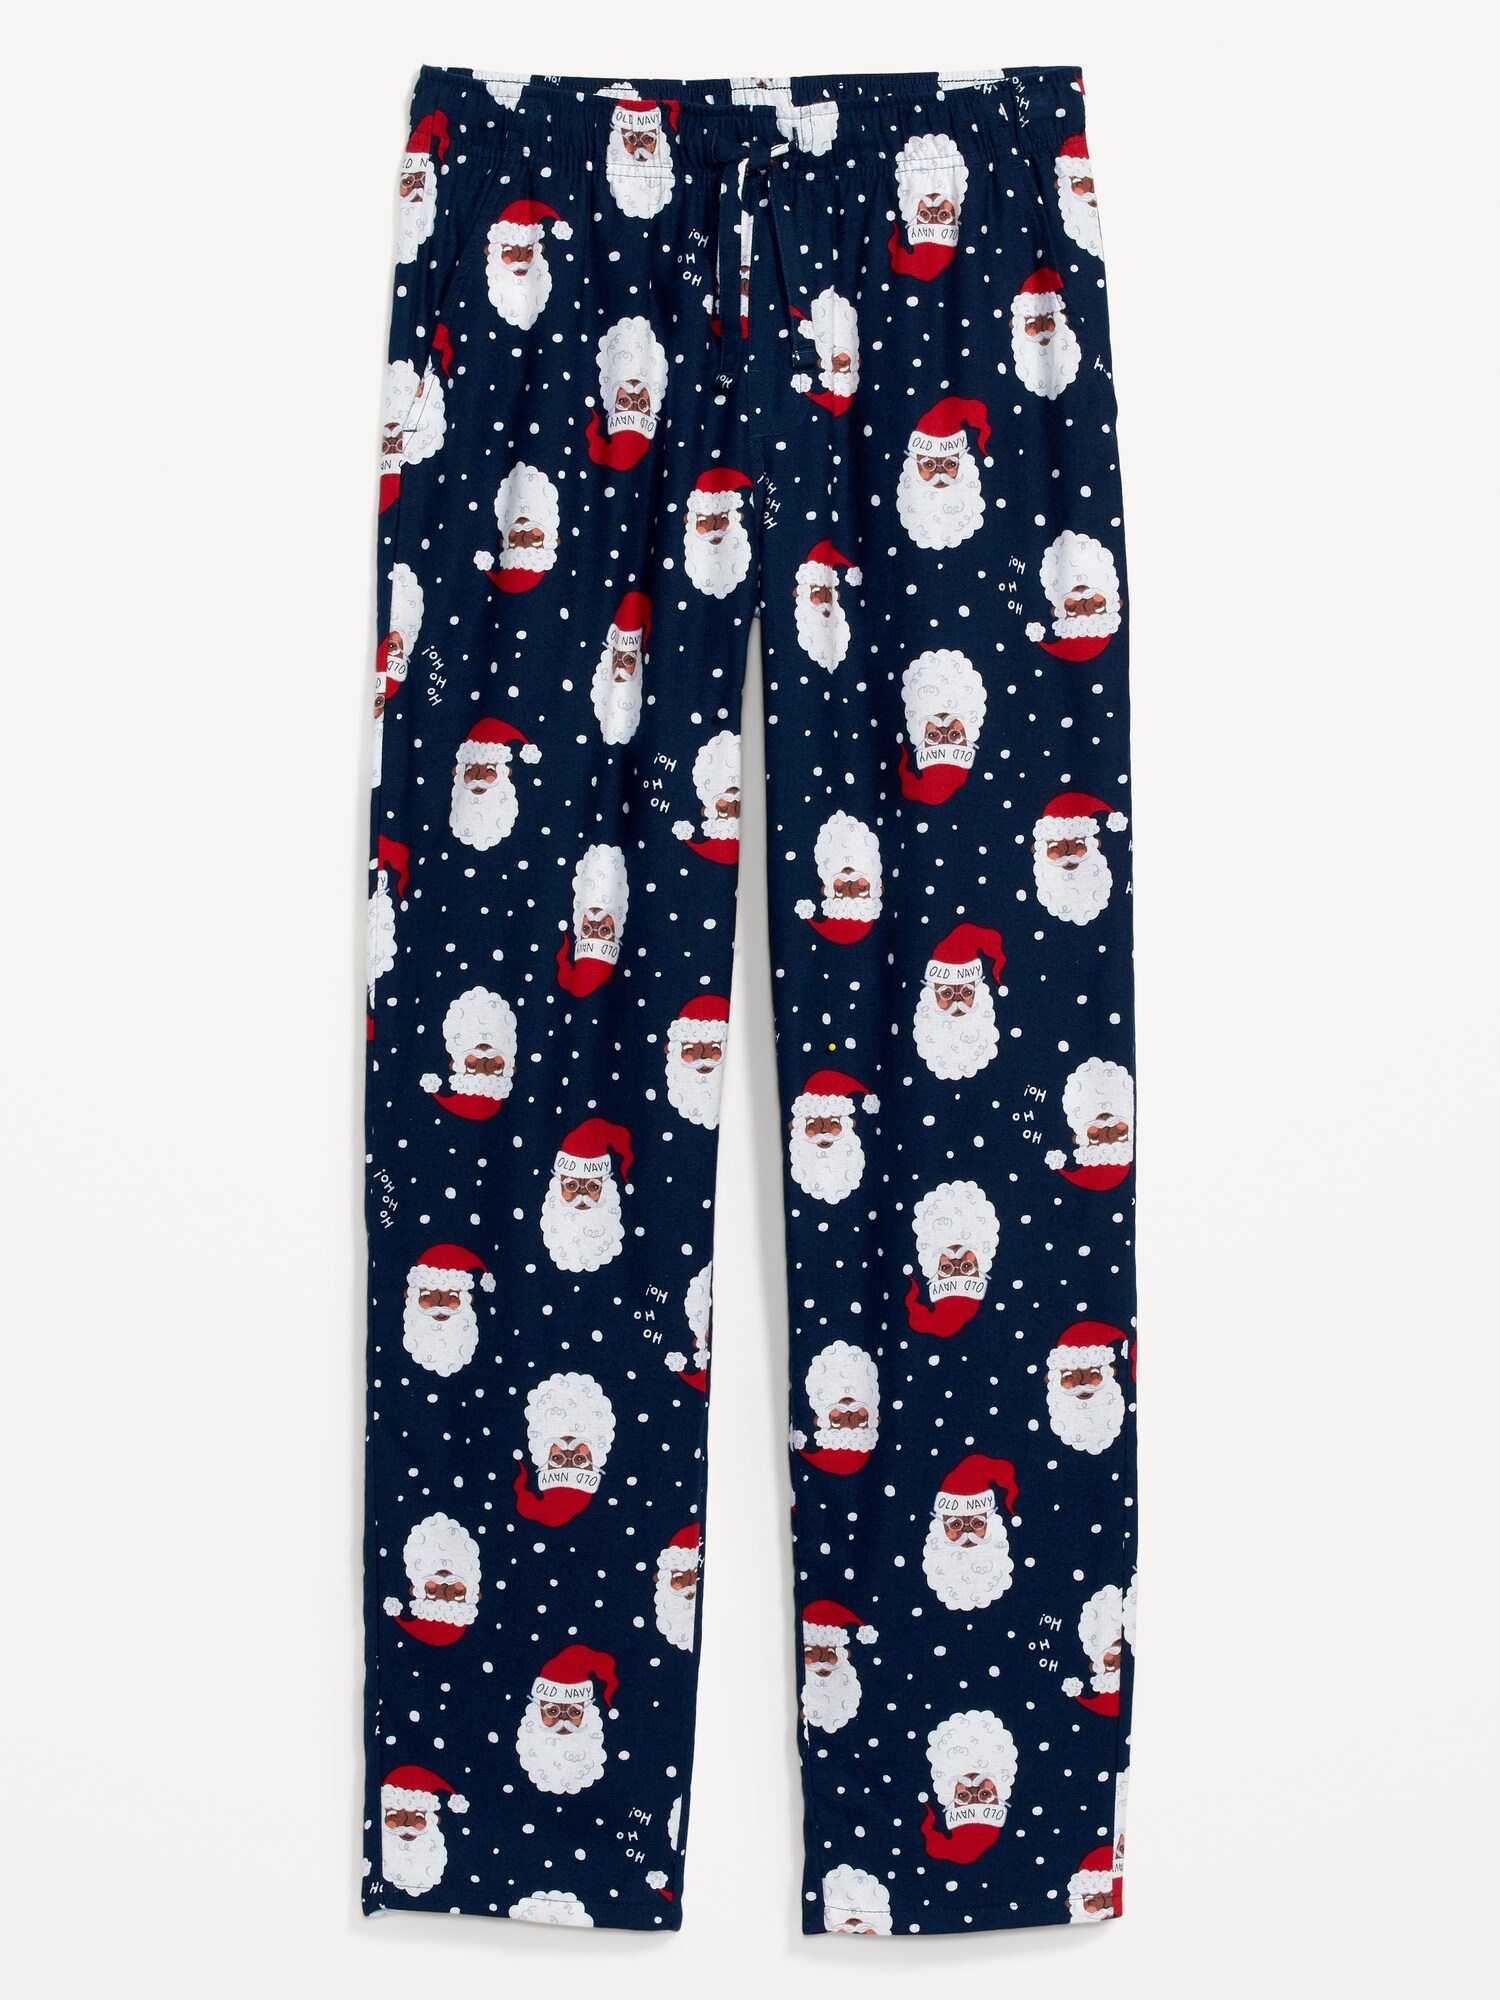 Printed Flannel Pajama Pants for Men | Old Navy